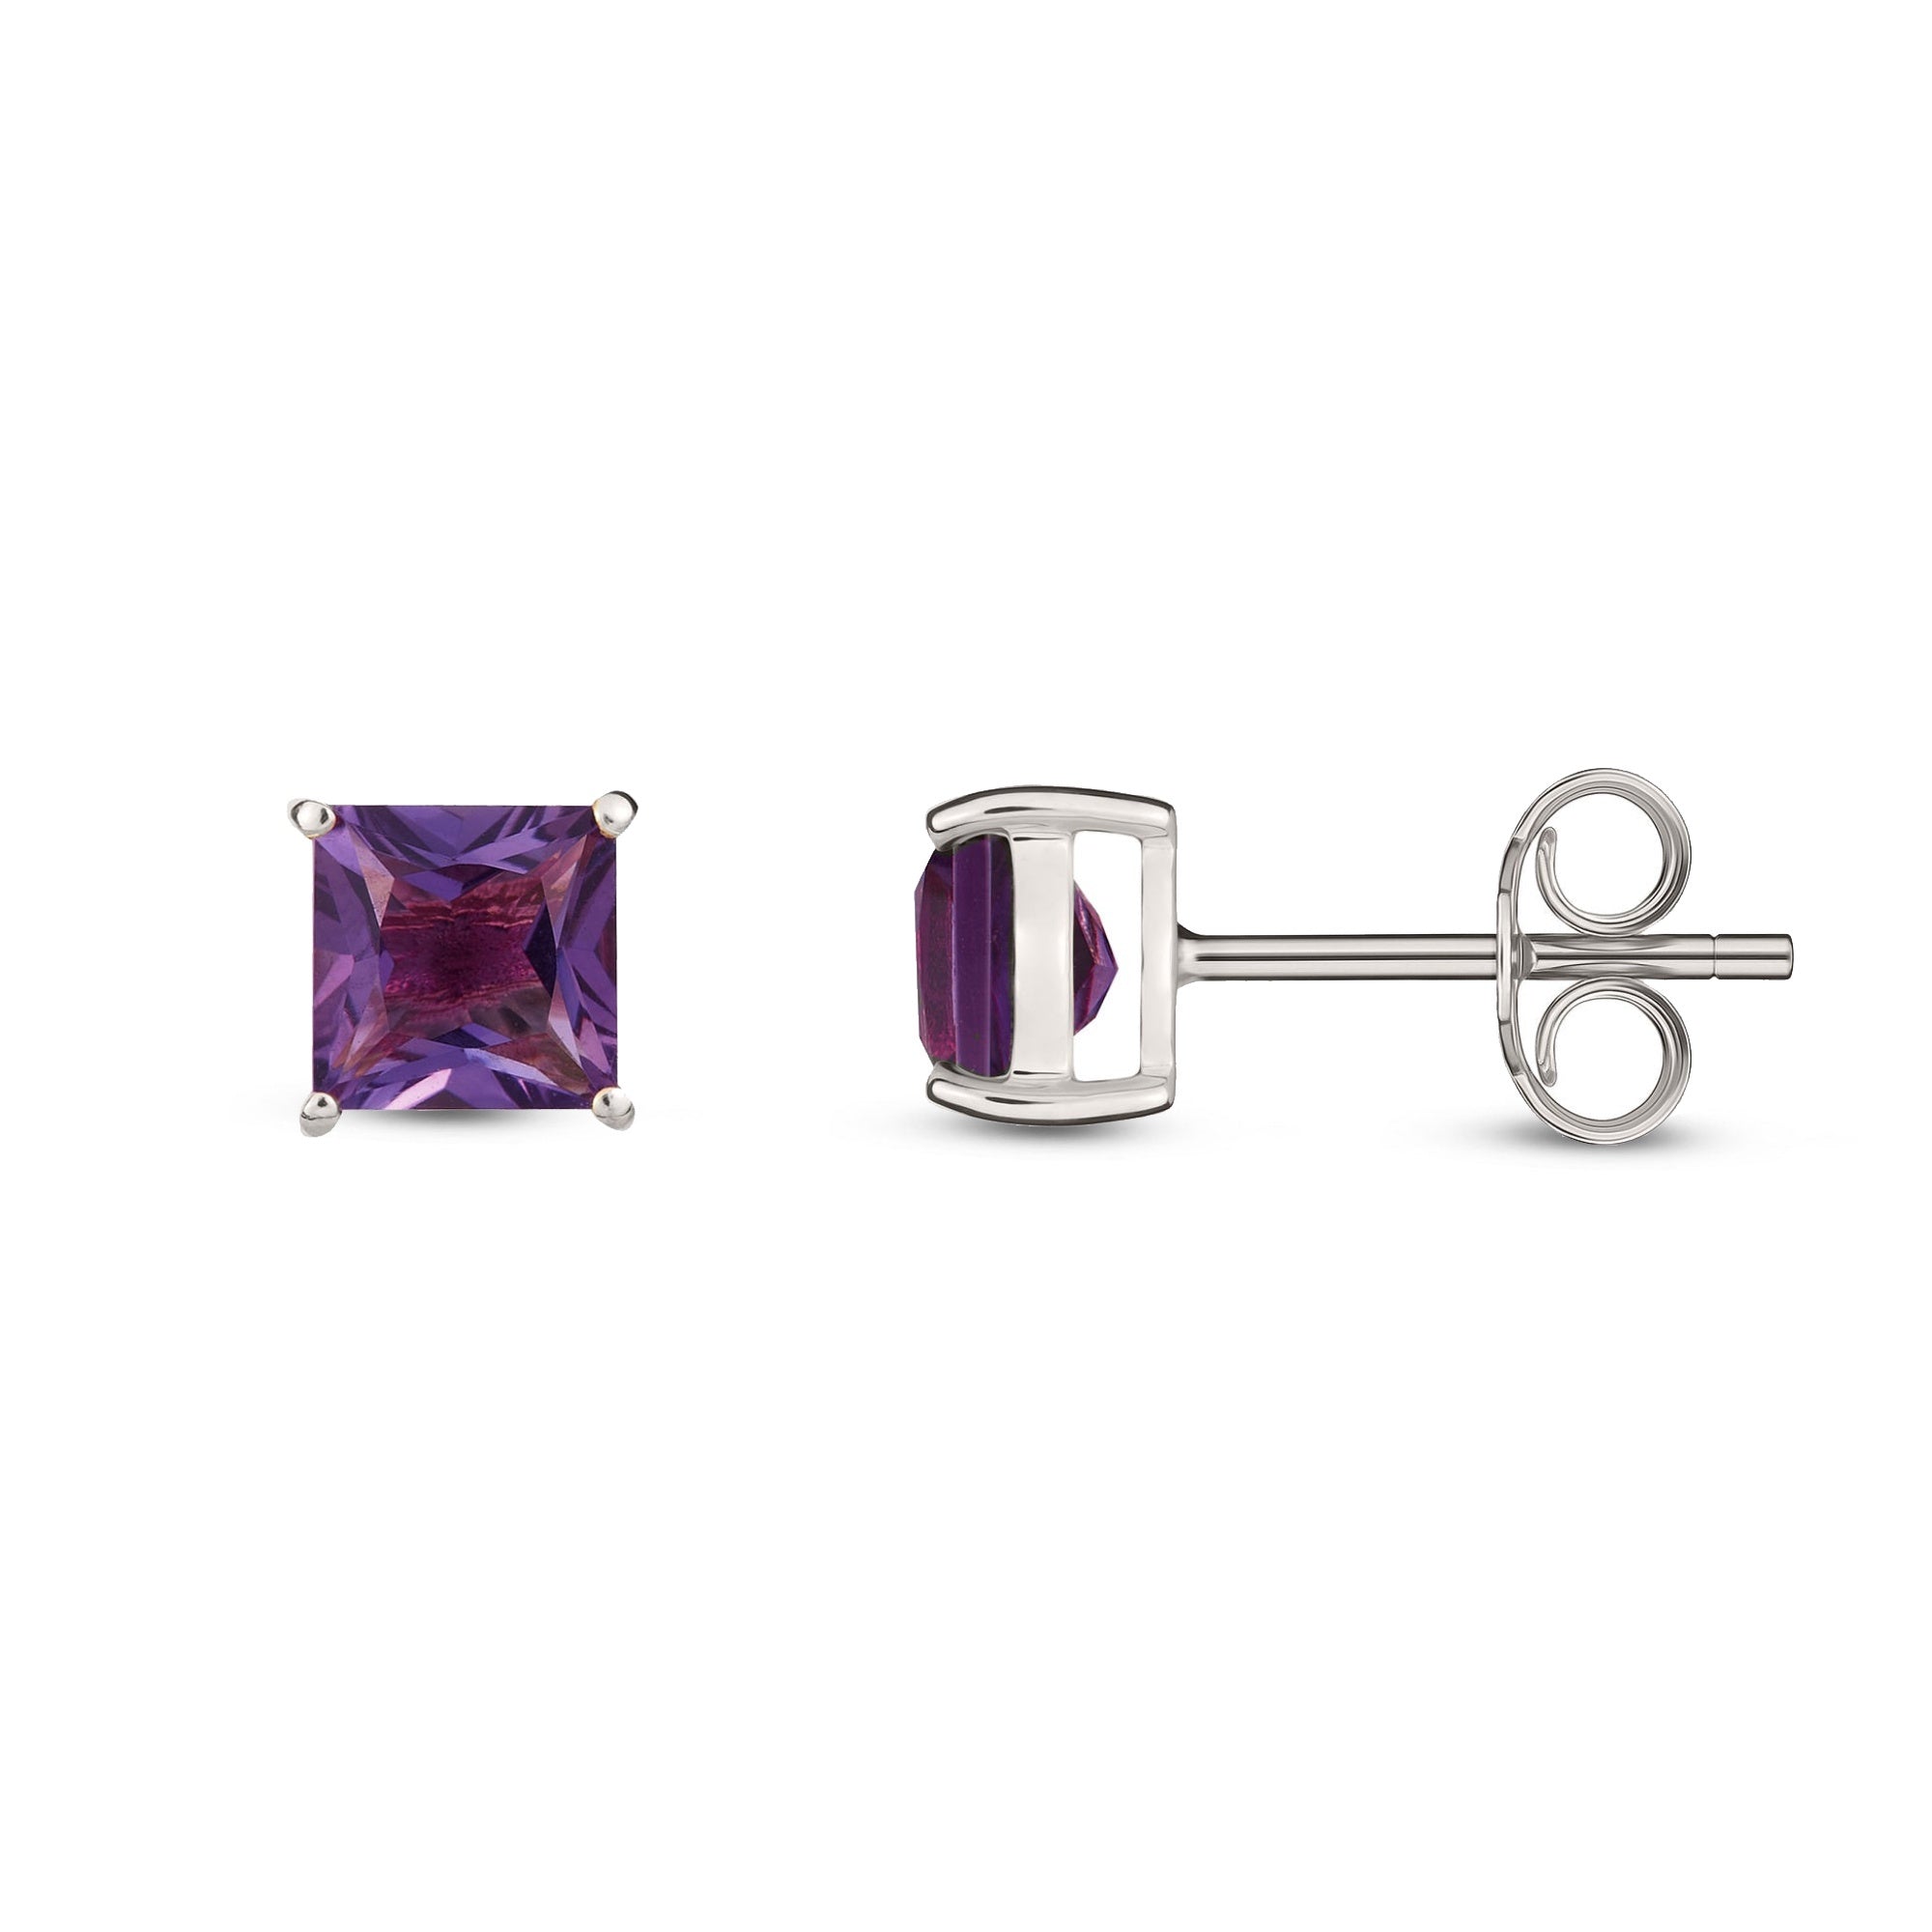 9ct White Gold Amethyst Four Claw Princess Cut Stud Earrings